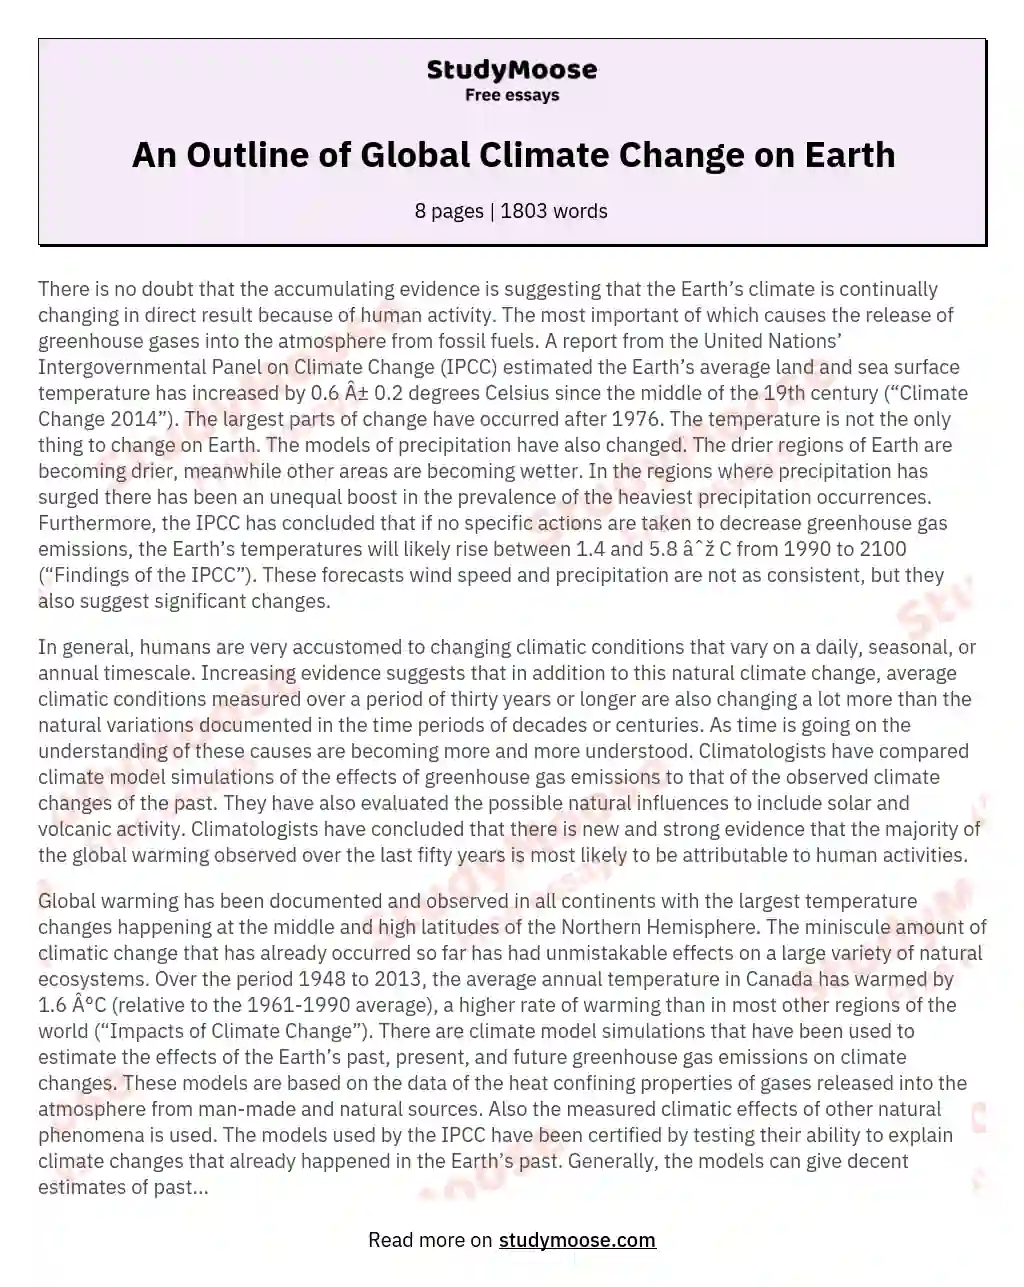 An Outline of Global Climate Change on Earth